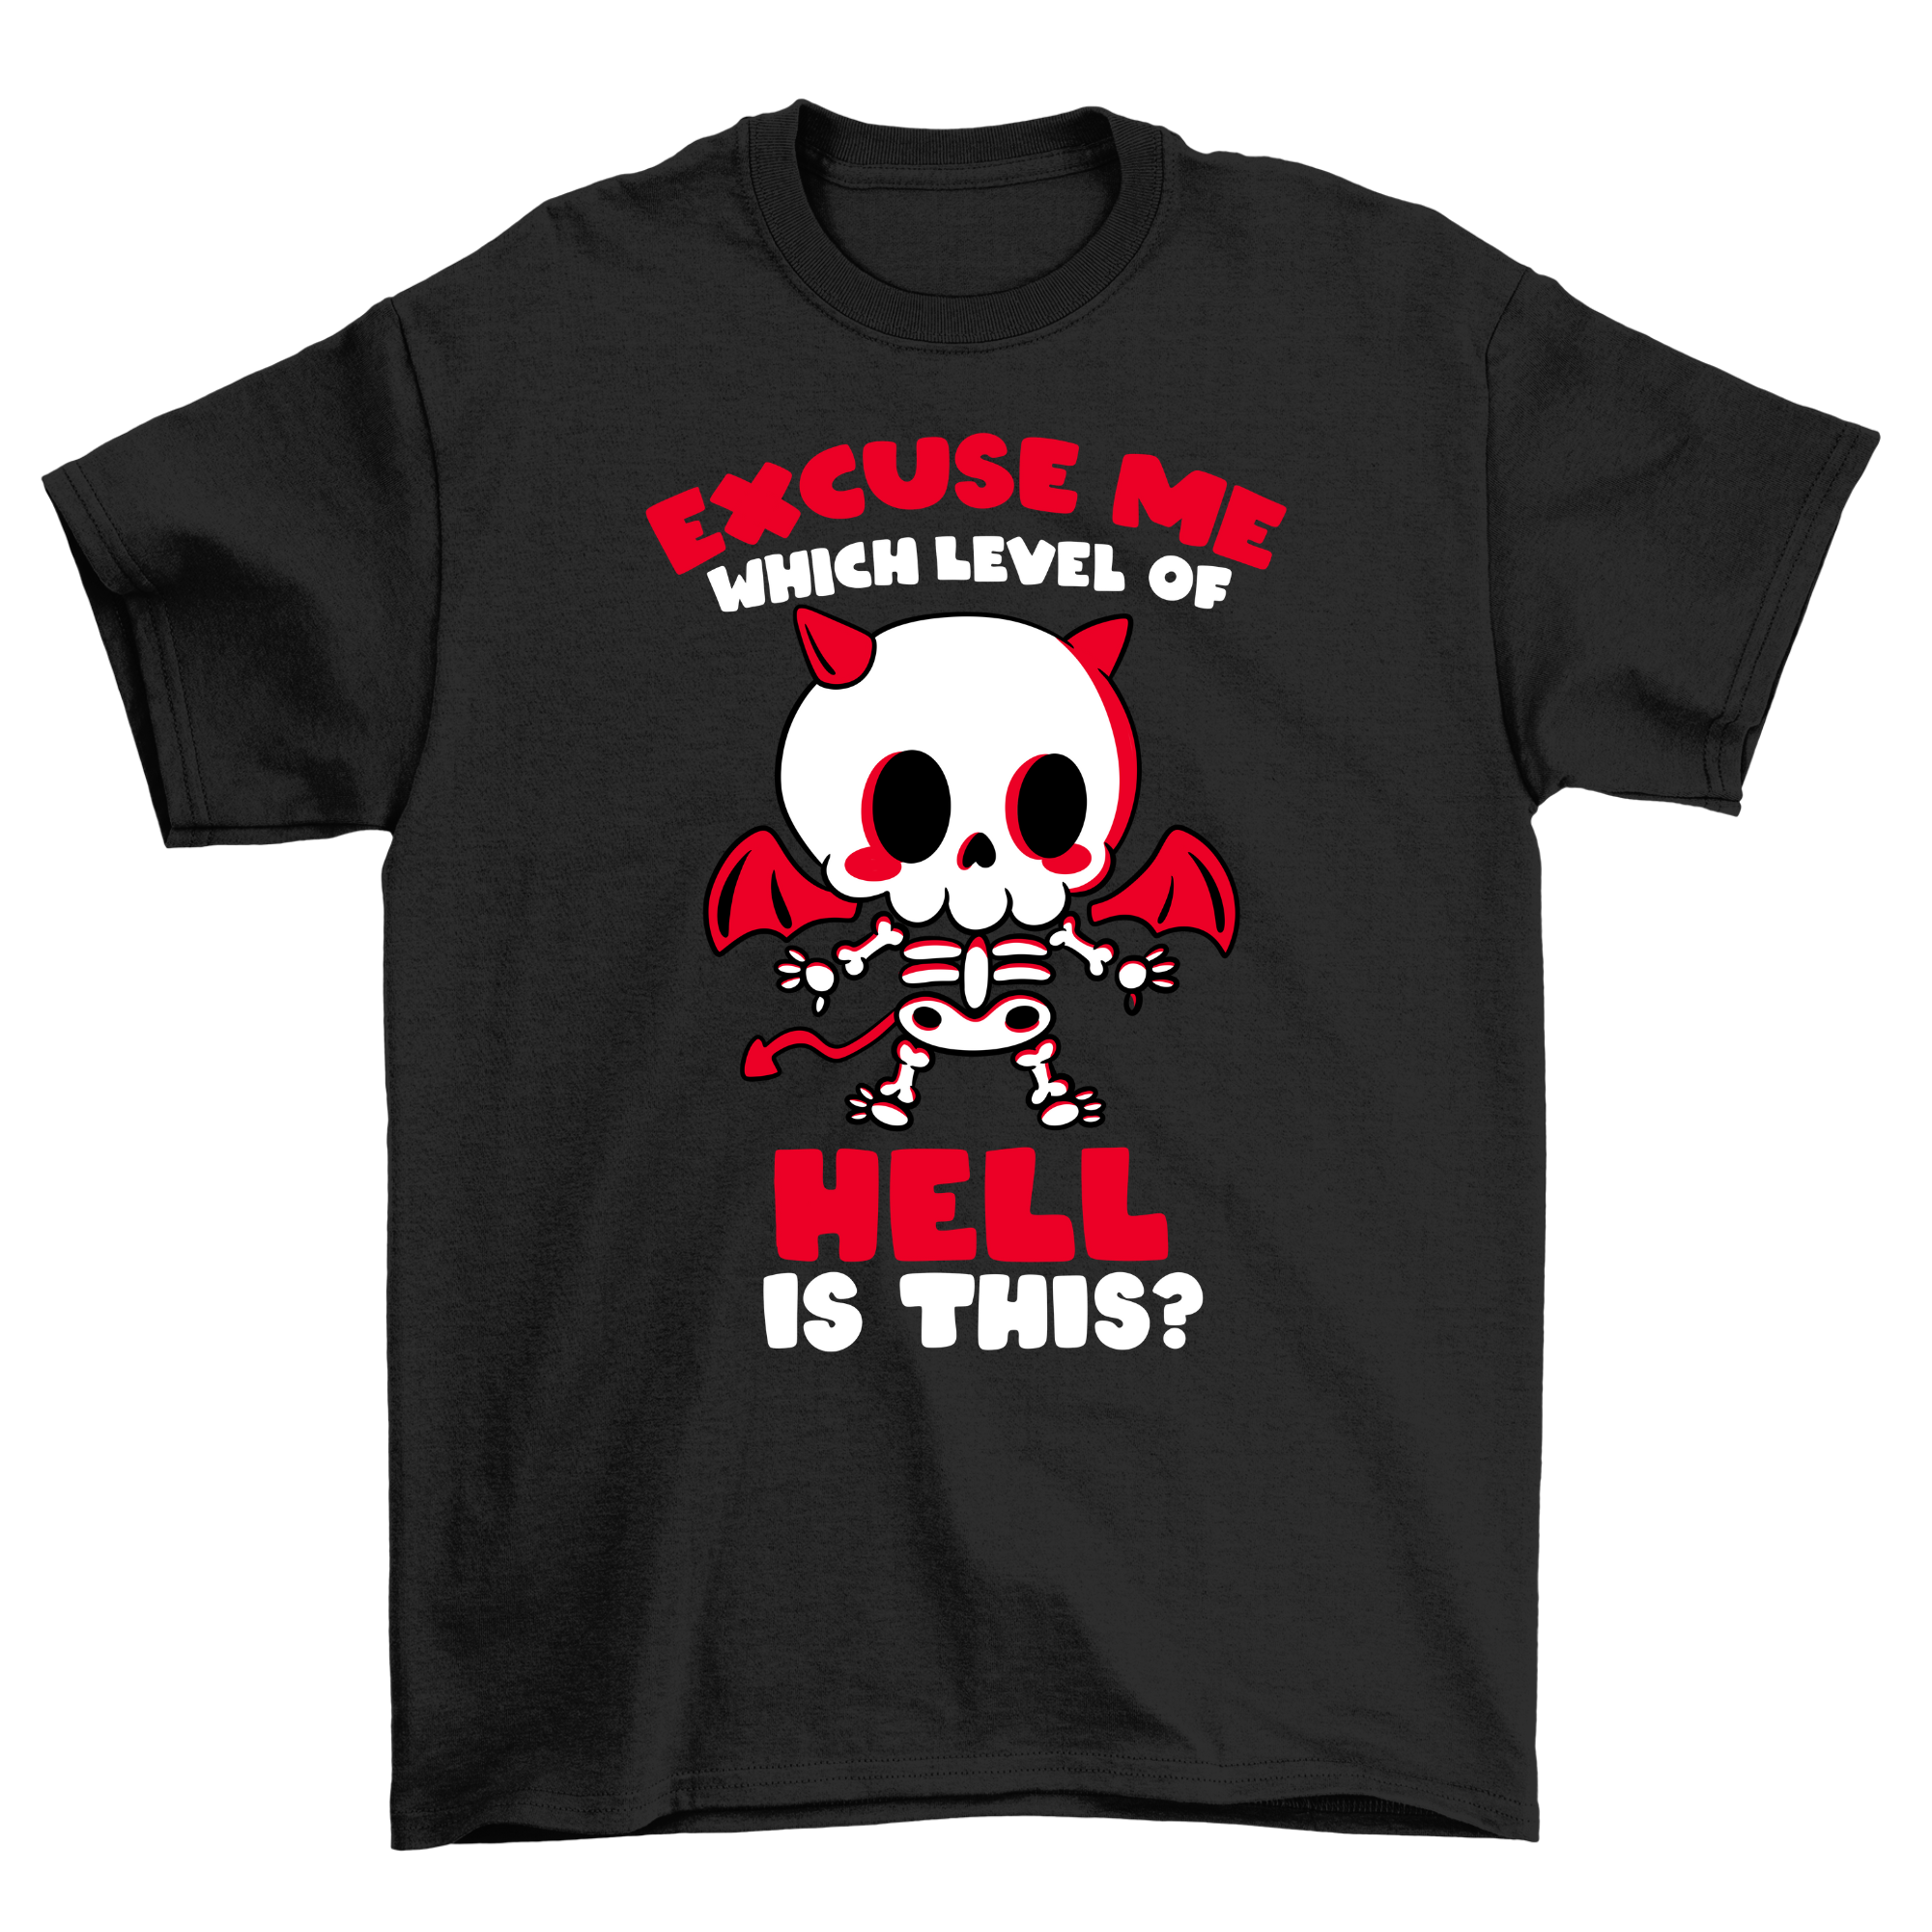 excuse me hell - Shirt Unisex